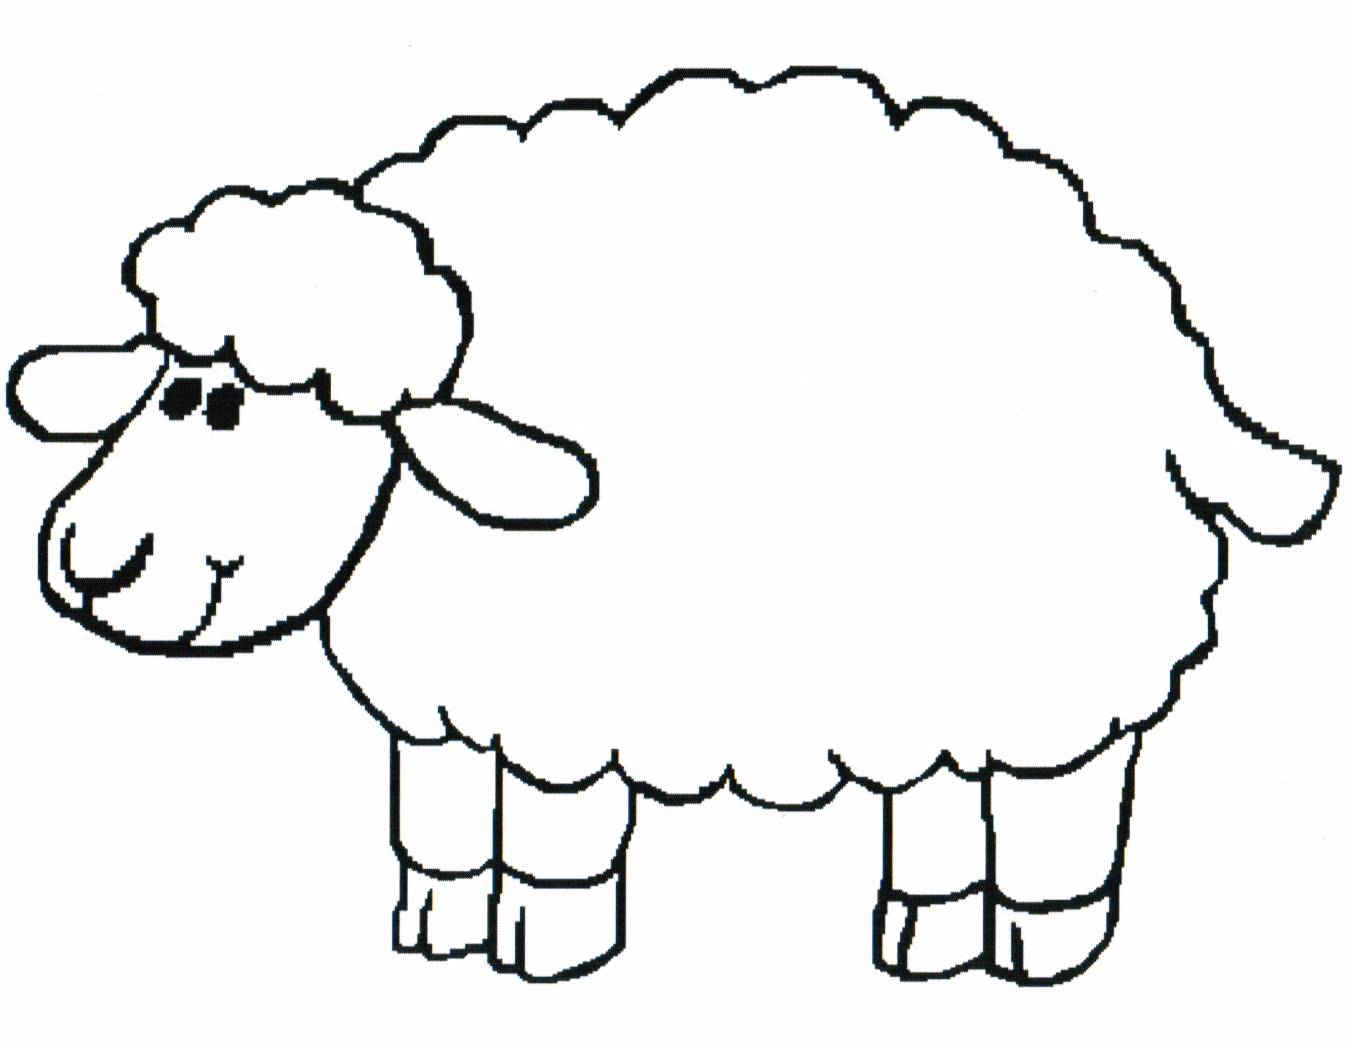 Outline Of A Lamb - ClipArt Best